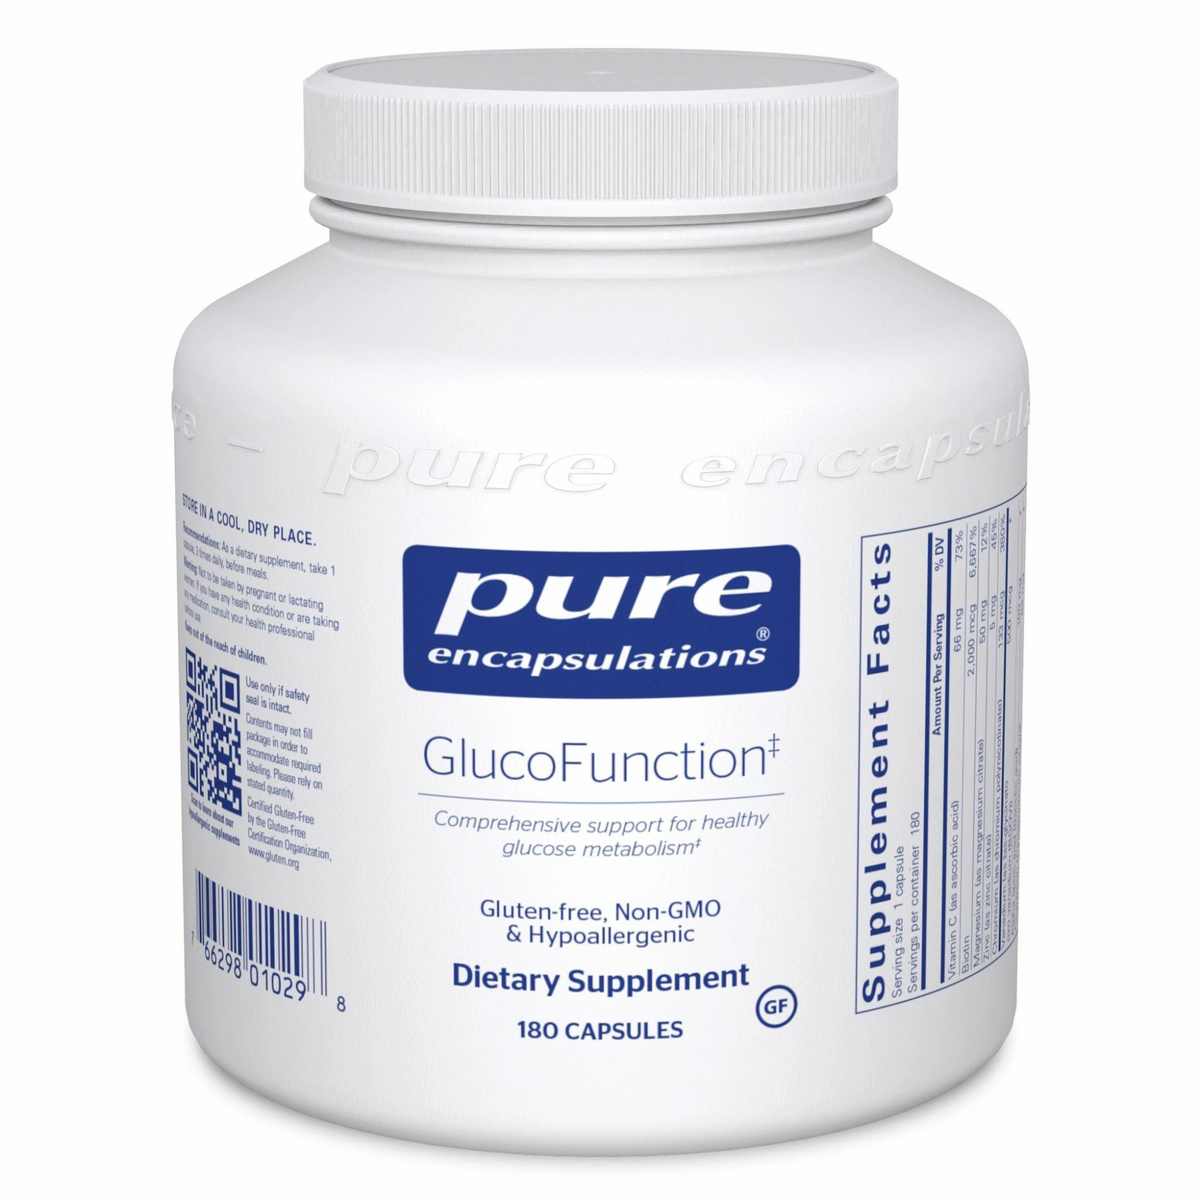 Primary Image of GlucoFunction Capsules (180 count)